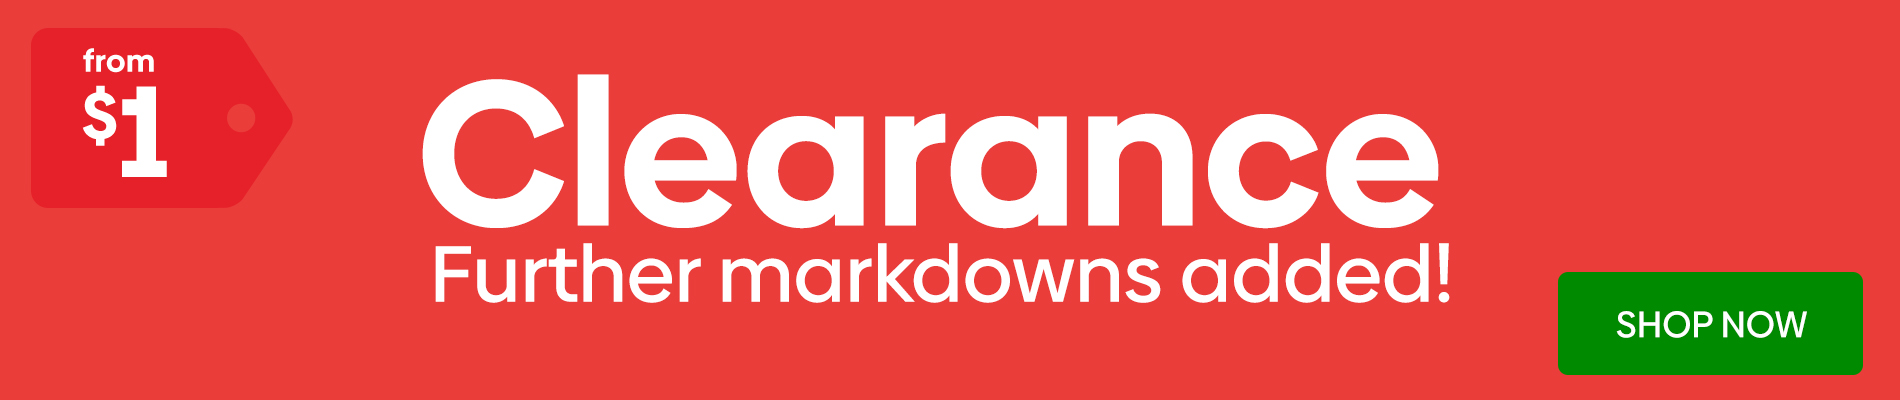 #Clearance Further Markdowns Added! - Shop Now